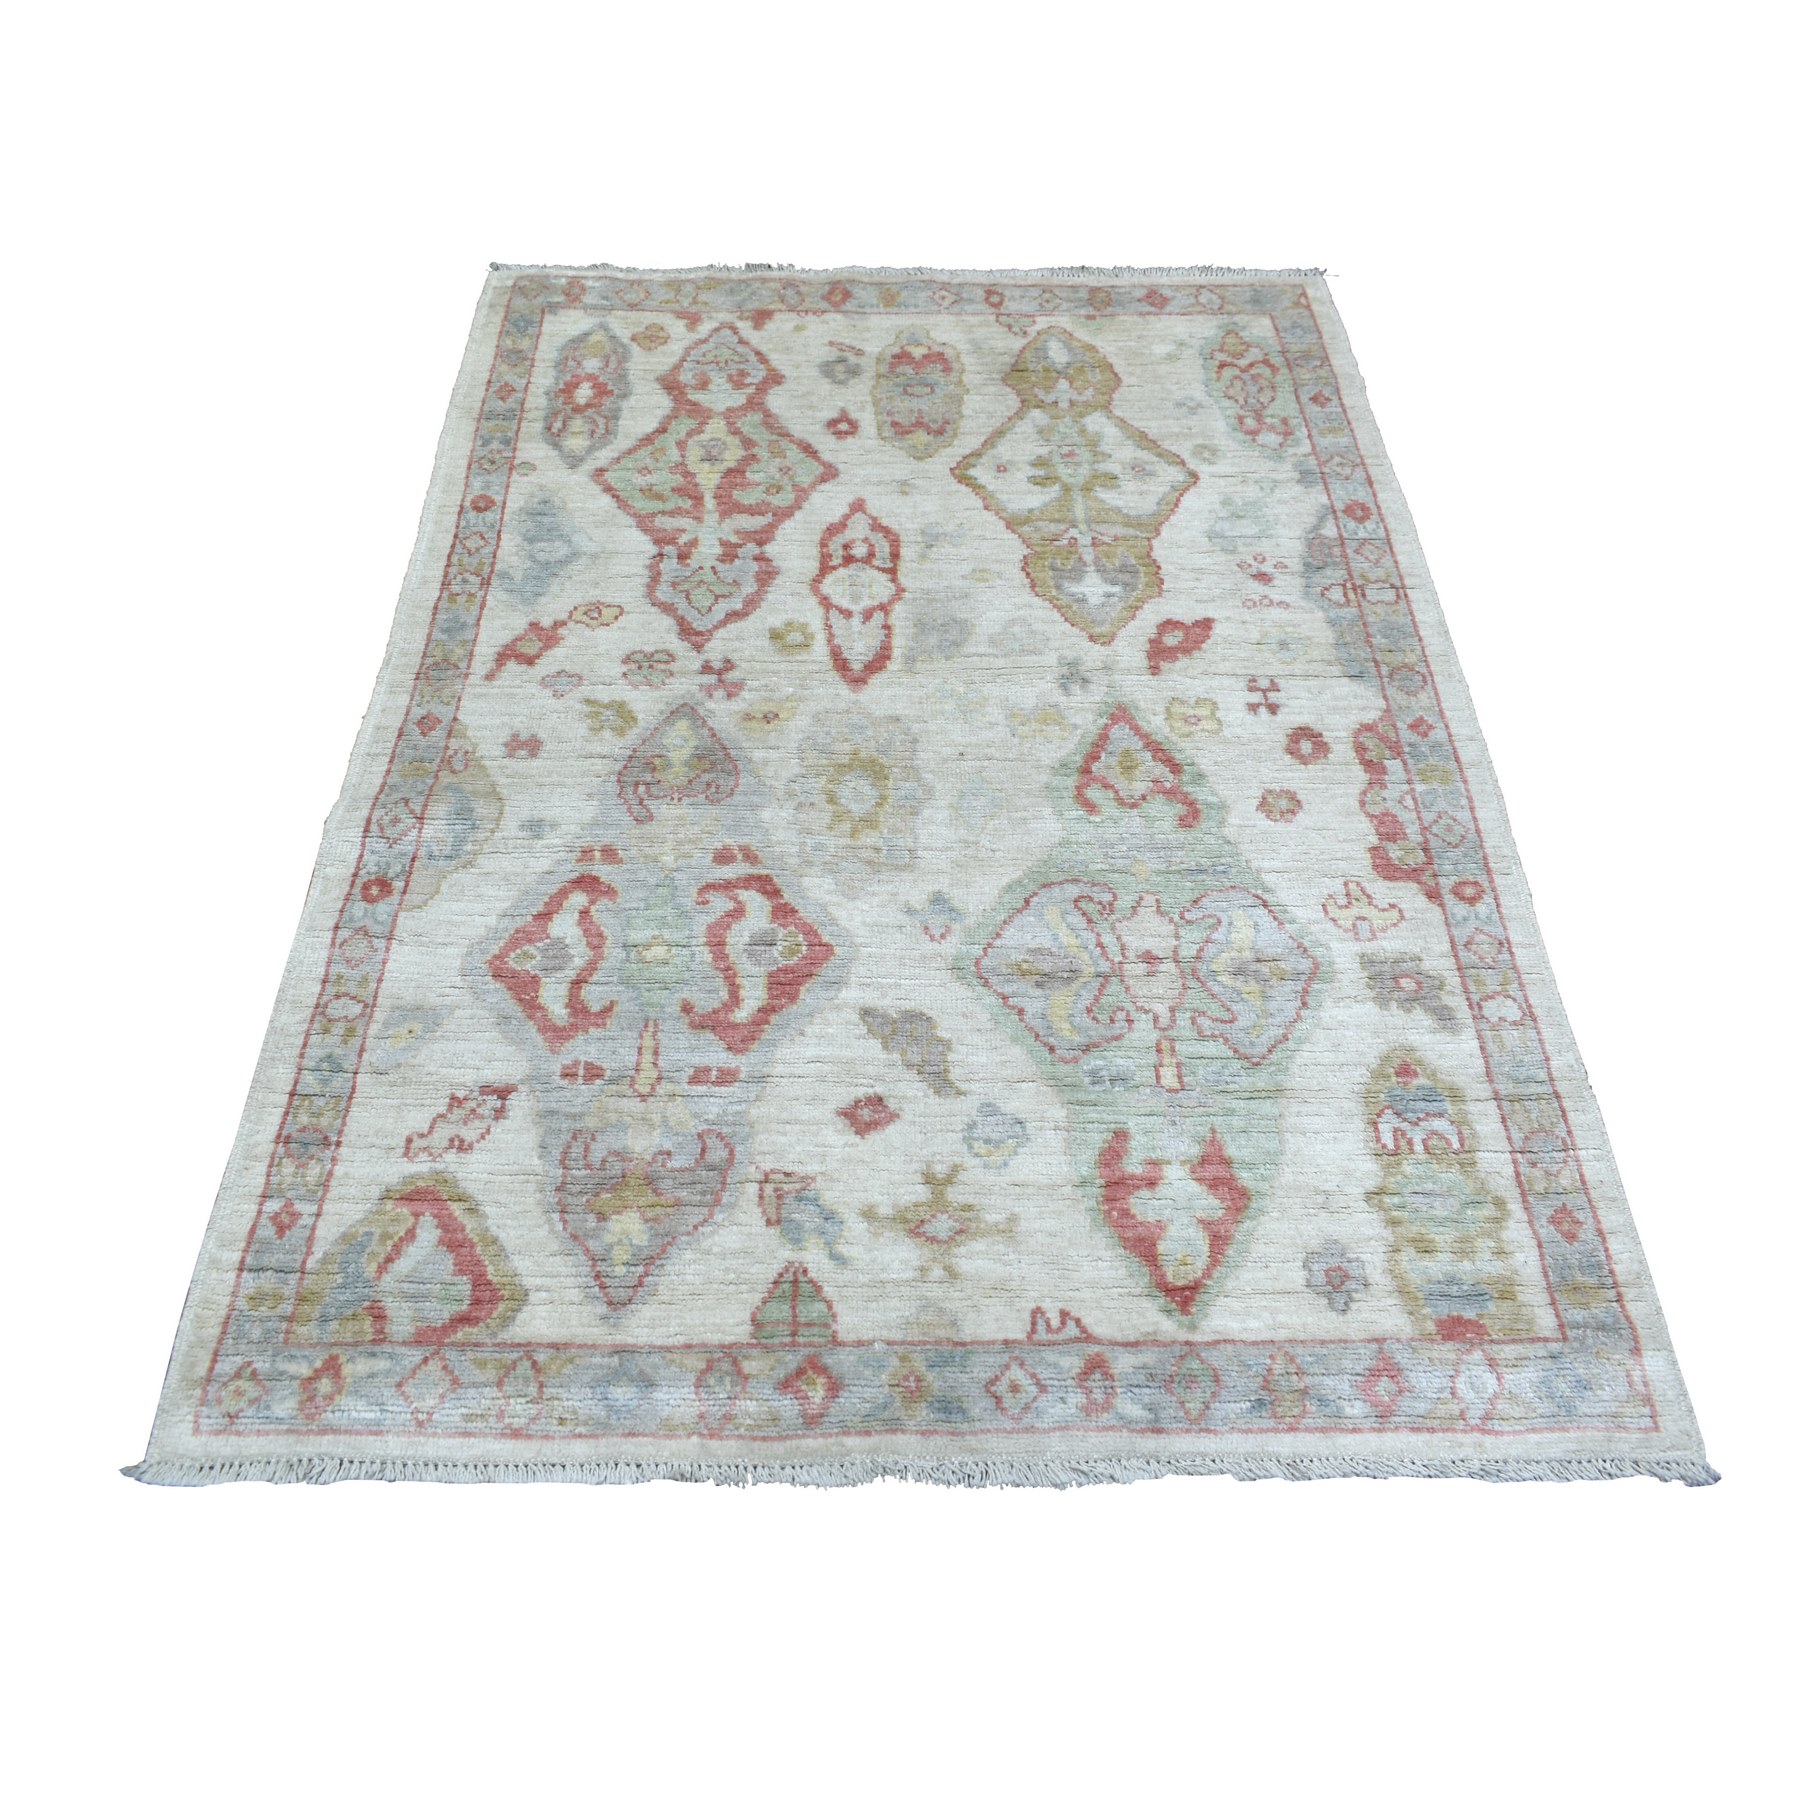 4'2"x5'7" Ivory Hand Woven Angora Oushak All Over Motifs Natural Dyes, Afghan Wool Oriental Rug 